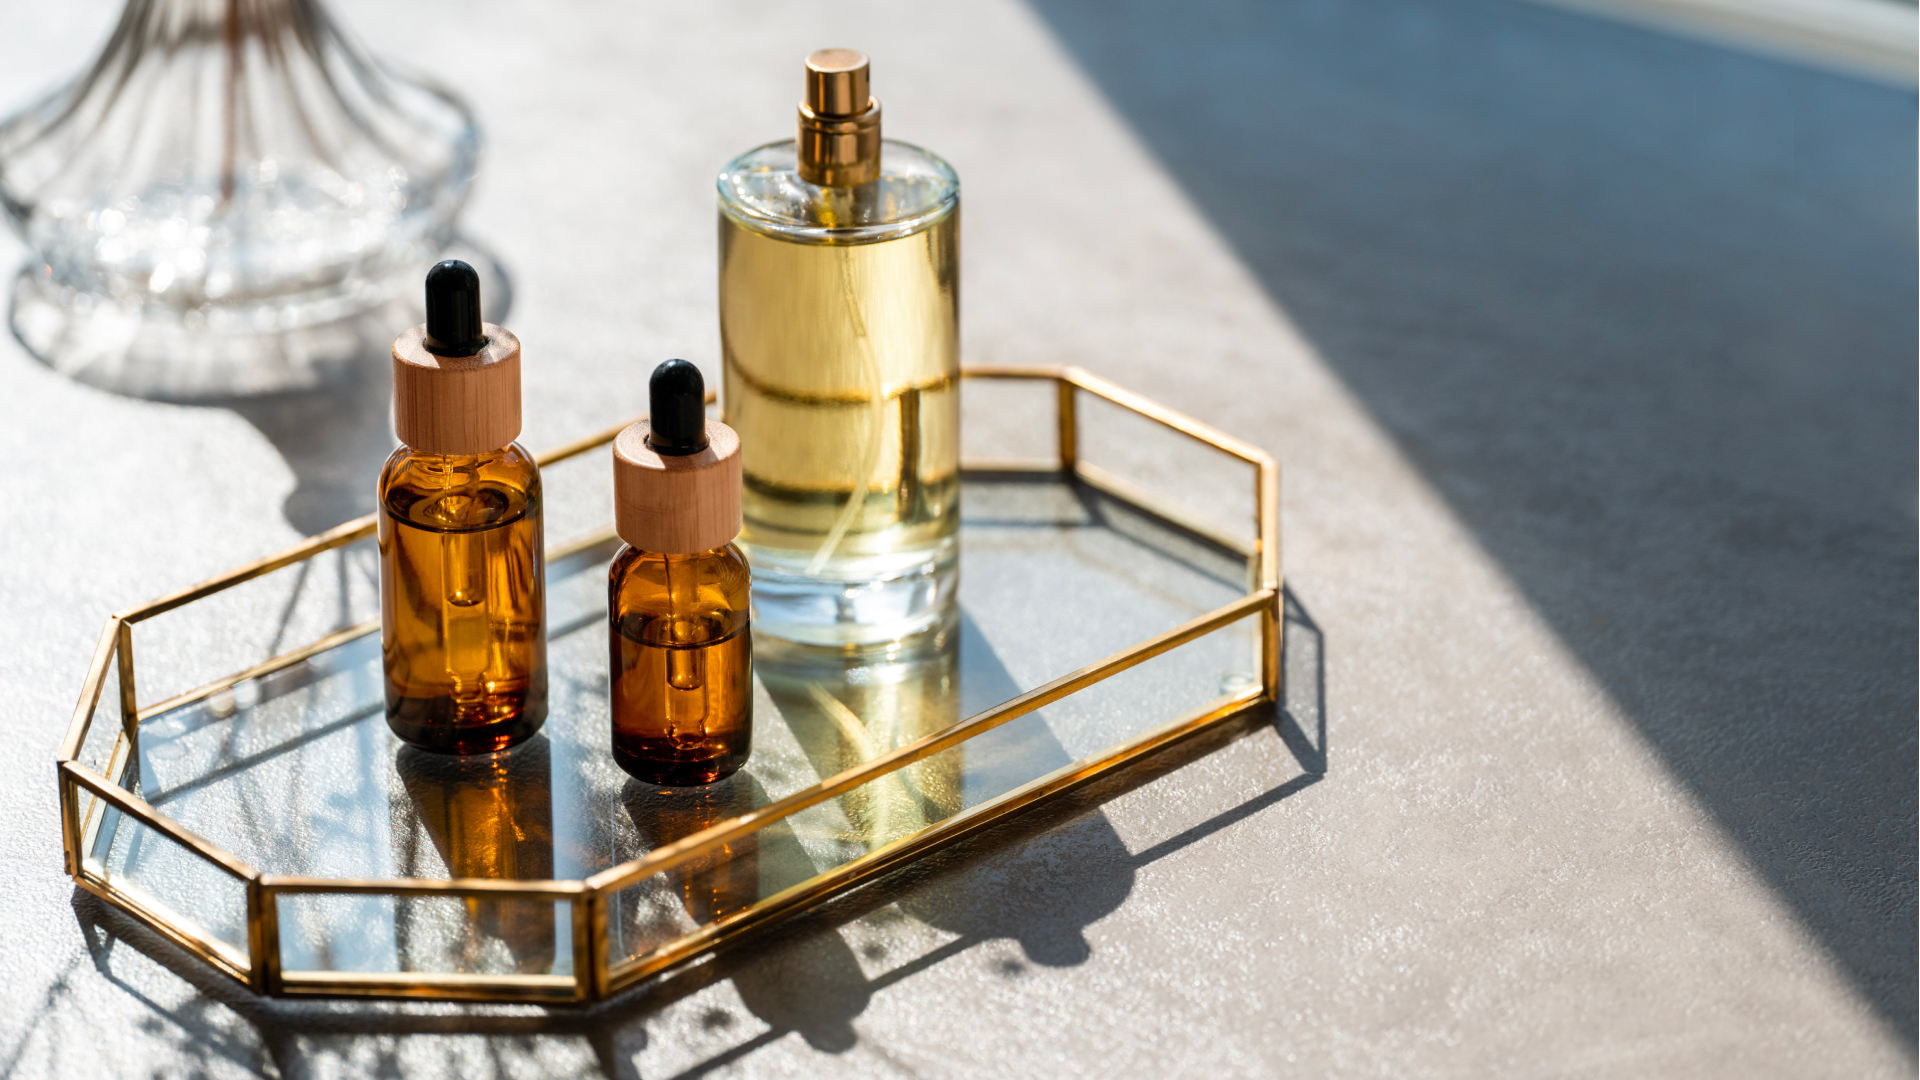 Find Your New Signature Scent During Sephora's Fragrance Sale